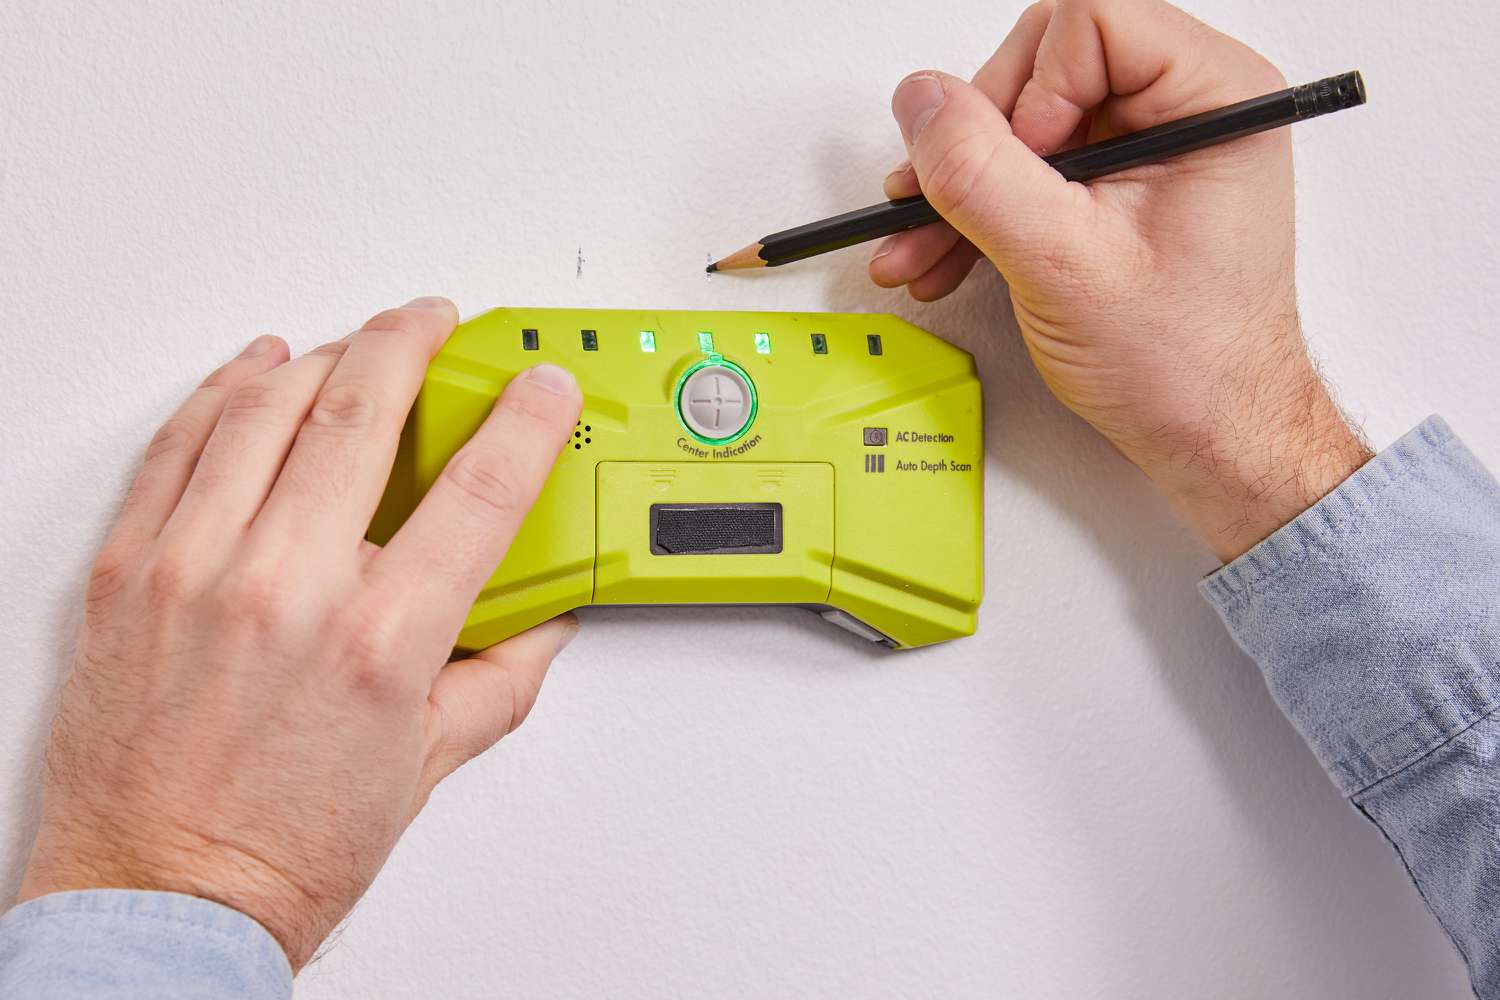 How To Find Studs In Plaster Wall Without Stud Finder